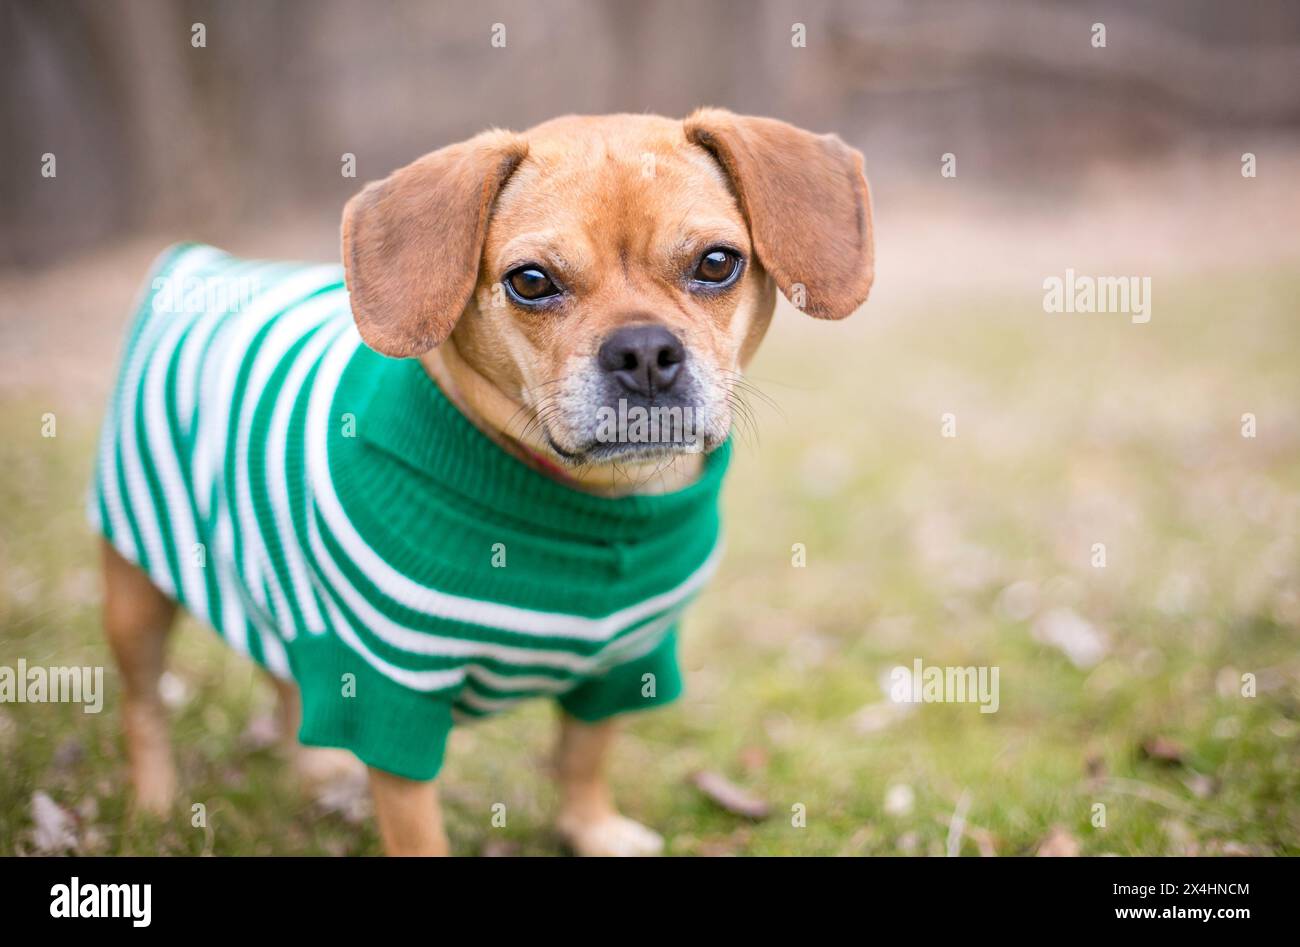 A Pug x Beagle or 'Puggle' mixed breed dog wearing a sweater outdoors Stock Photo